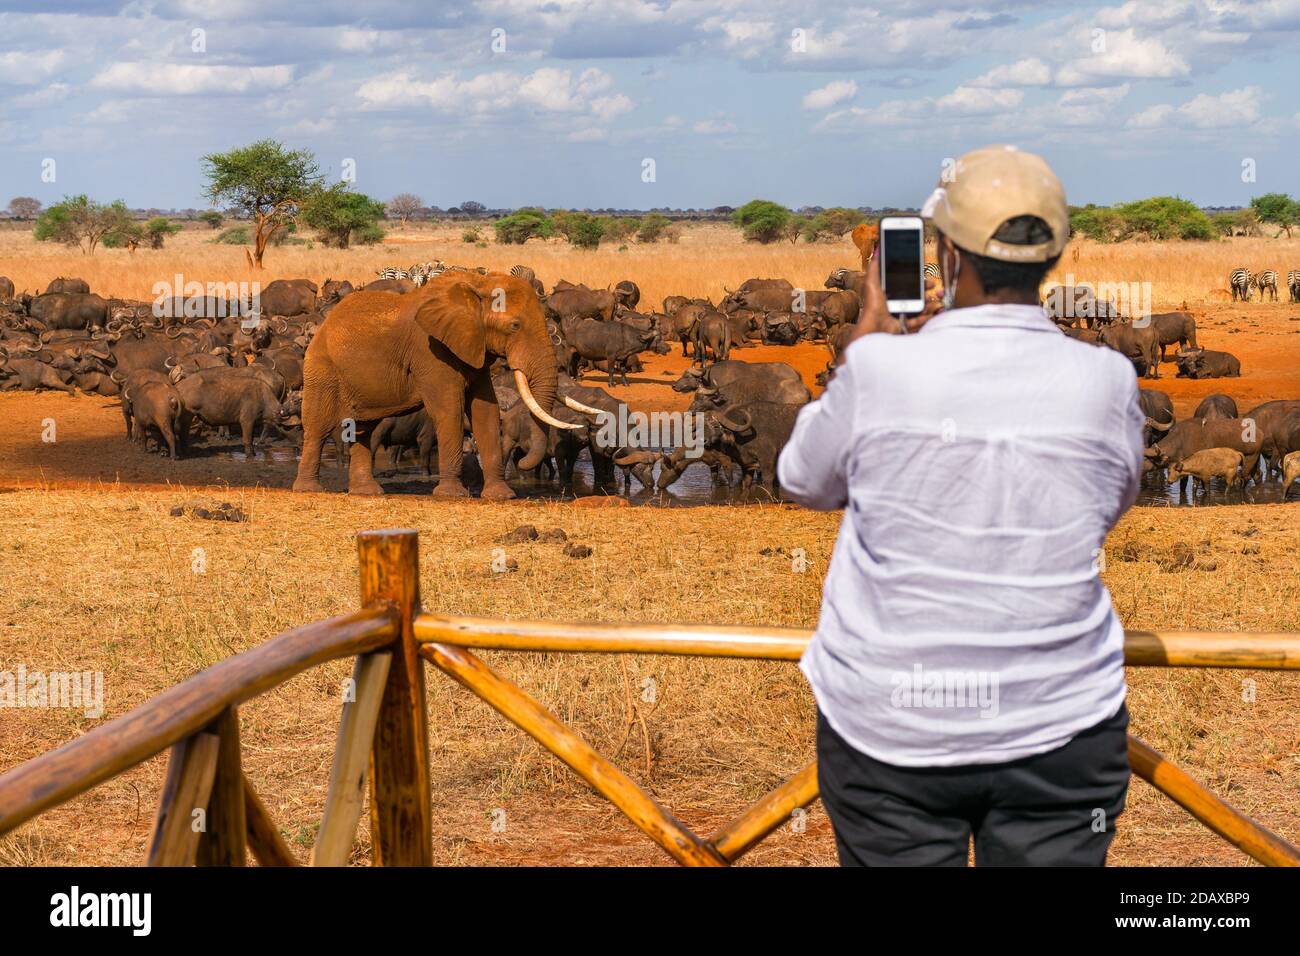 A tourist on viewing platform taking a photo of an African bush elephant (loxodonta africana) and cape buffalo at a watering hole, Ngutuni Lodge, Keny Stock Photo